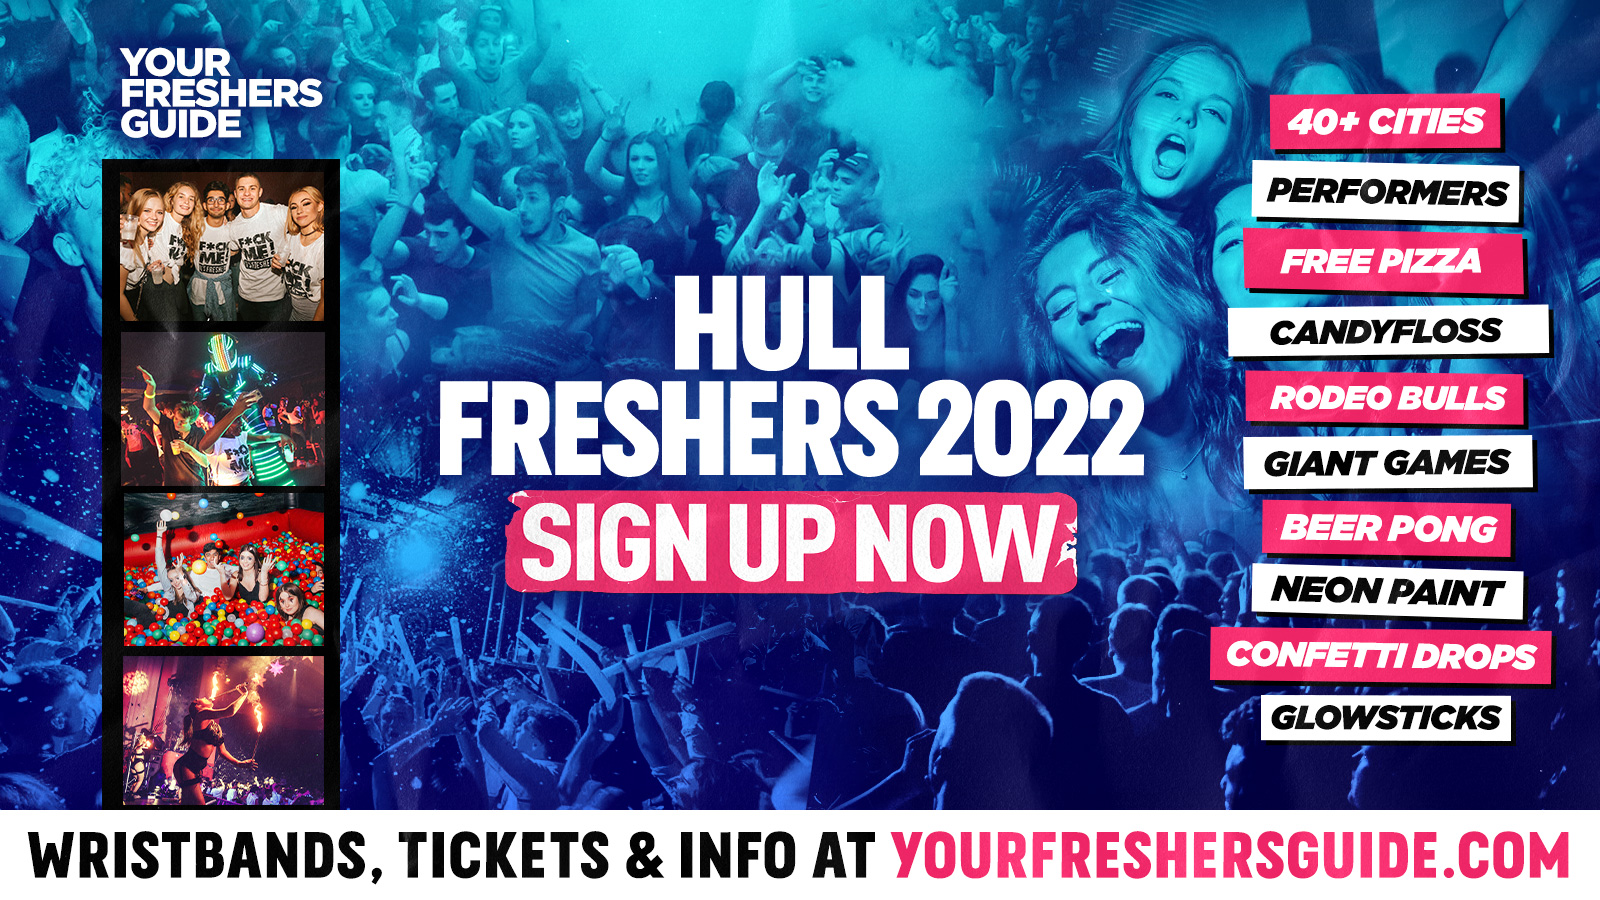 Hull Freshers 2022 FREE SIGN UP! The BIGGEST Events at Hull's BEST